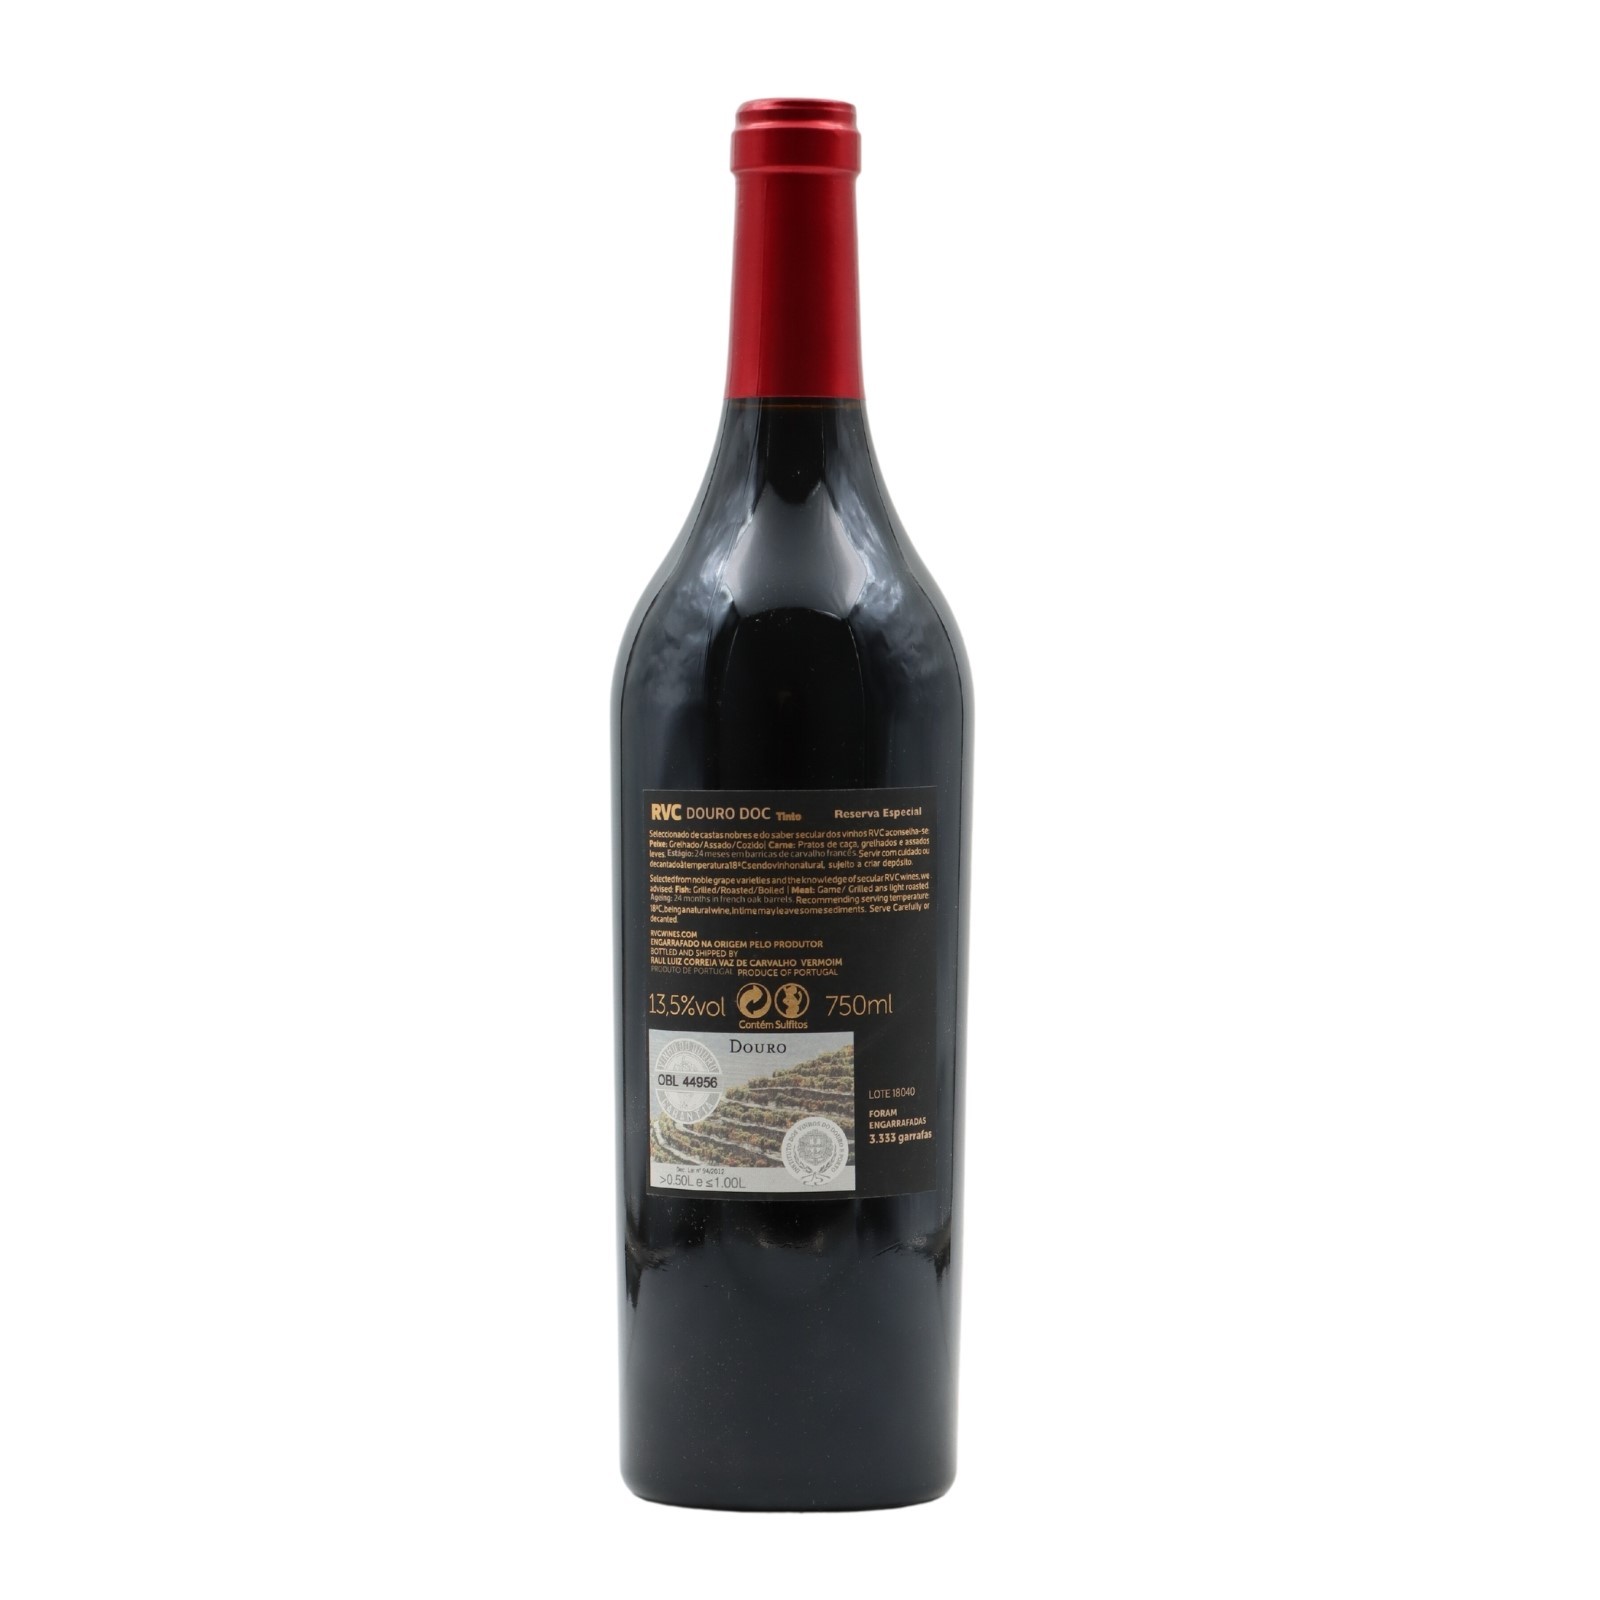 RVC Special Reserve Red 2014